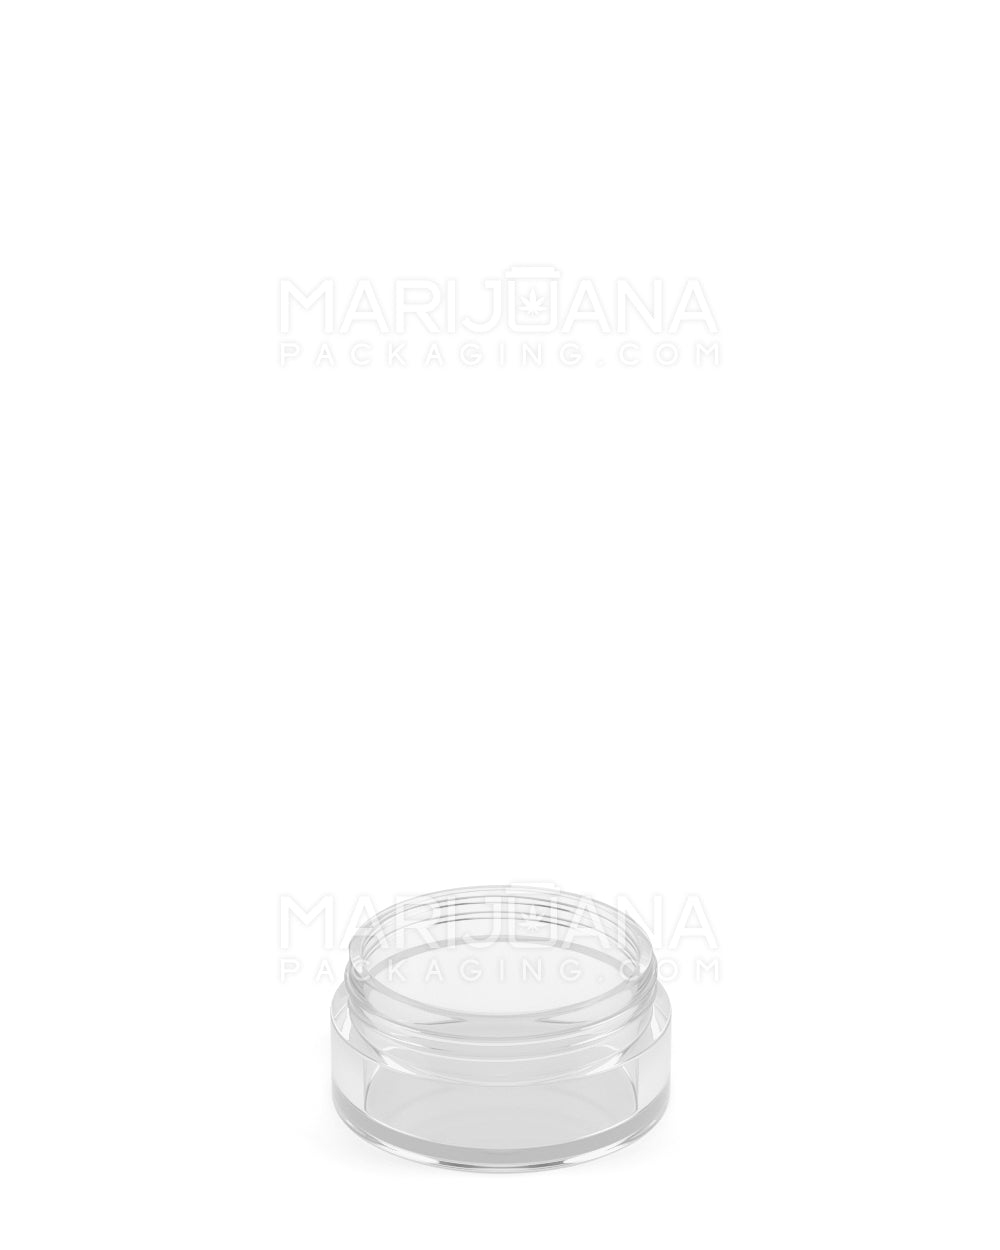 Clear Concentrate Containers w/ Screw Top Cap | 5mL - Plastic | Sample - 5